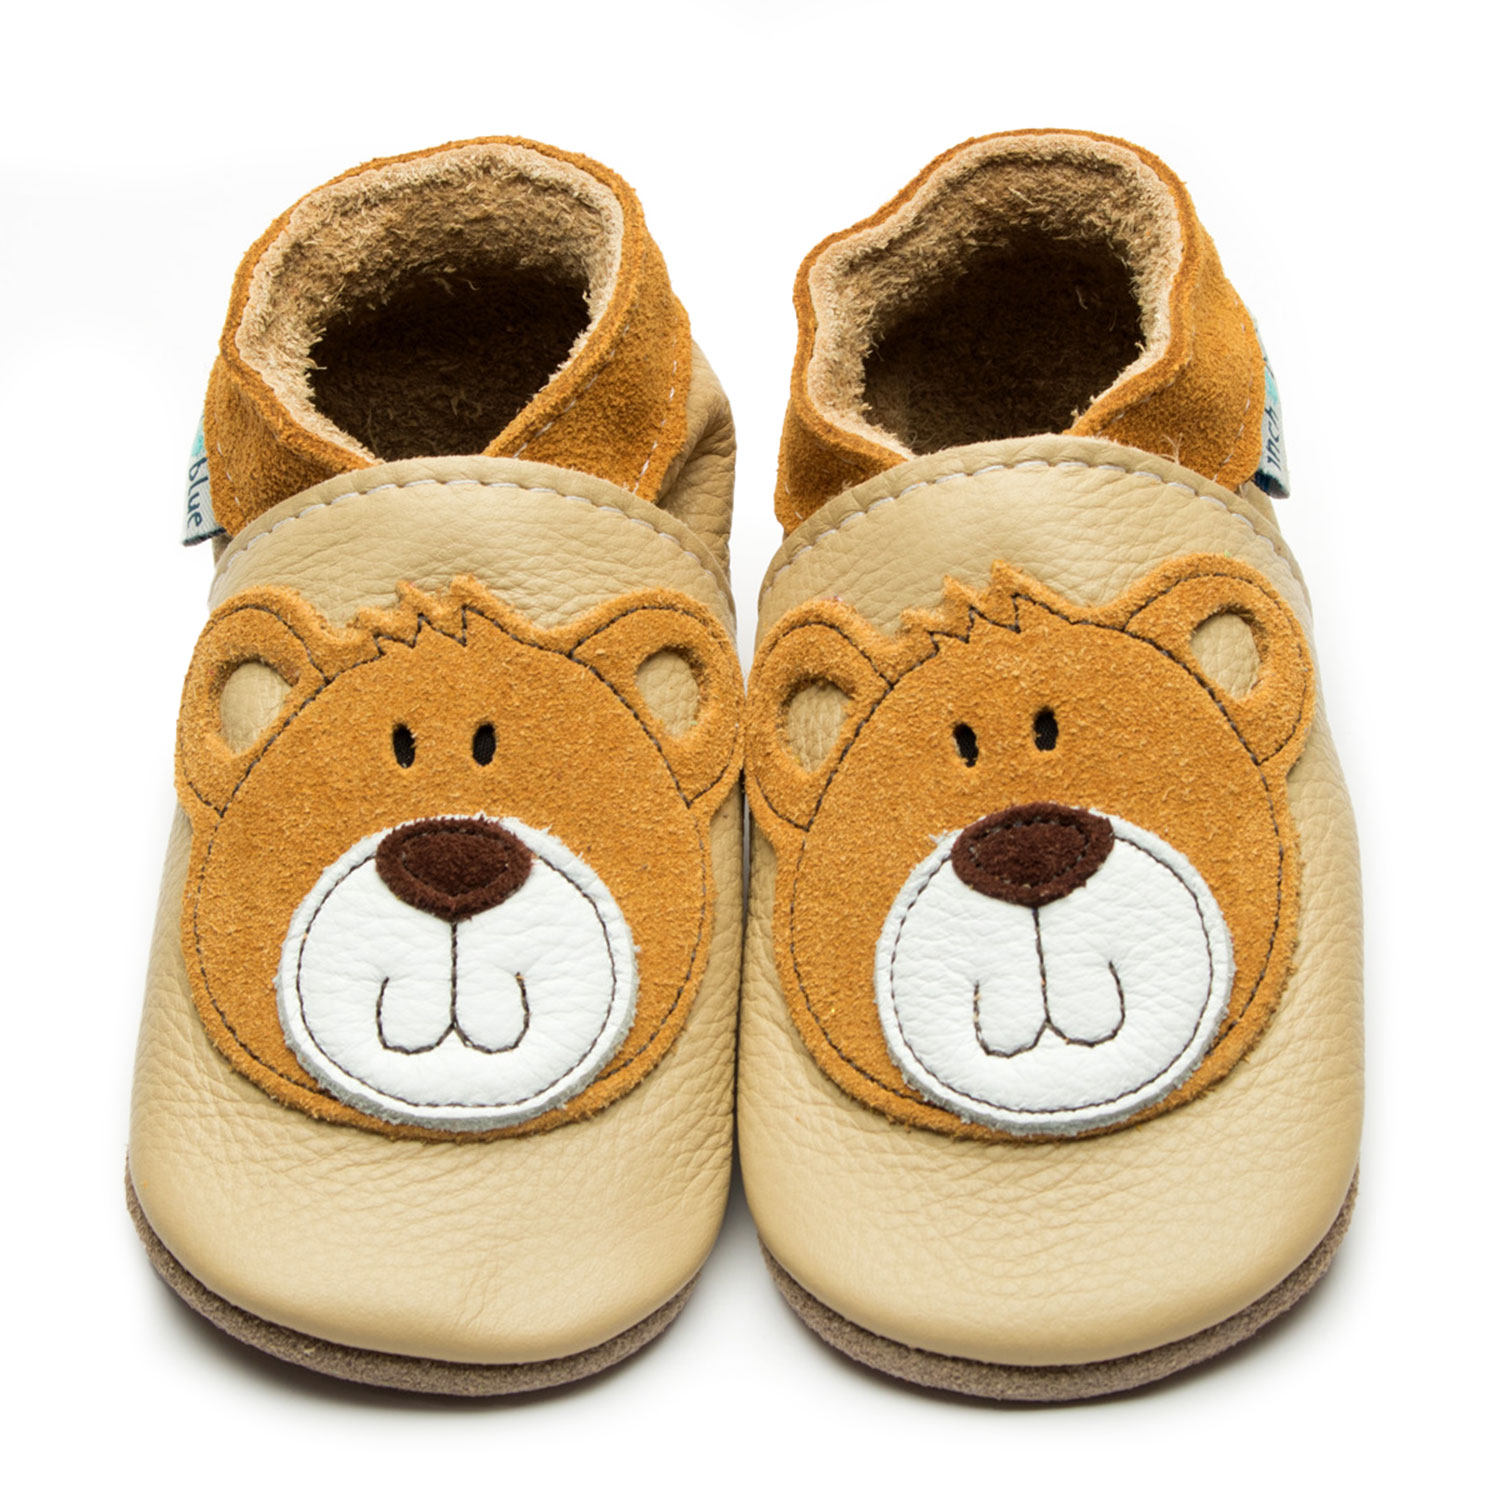 Baby Booties | Teddy Cream | Personalise | Gift | Leather | Inch Blue